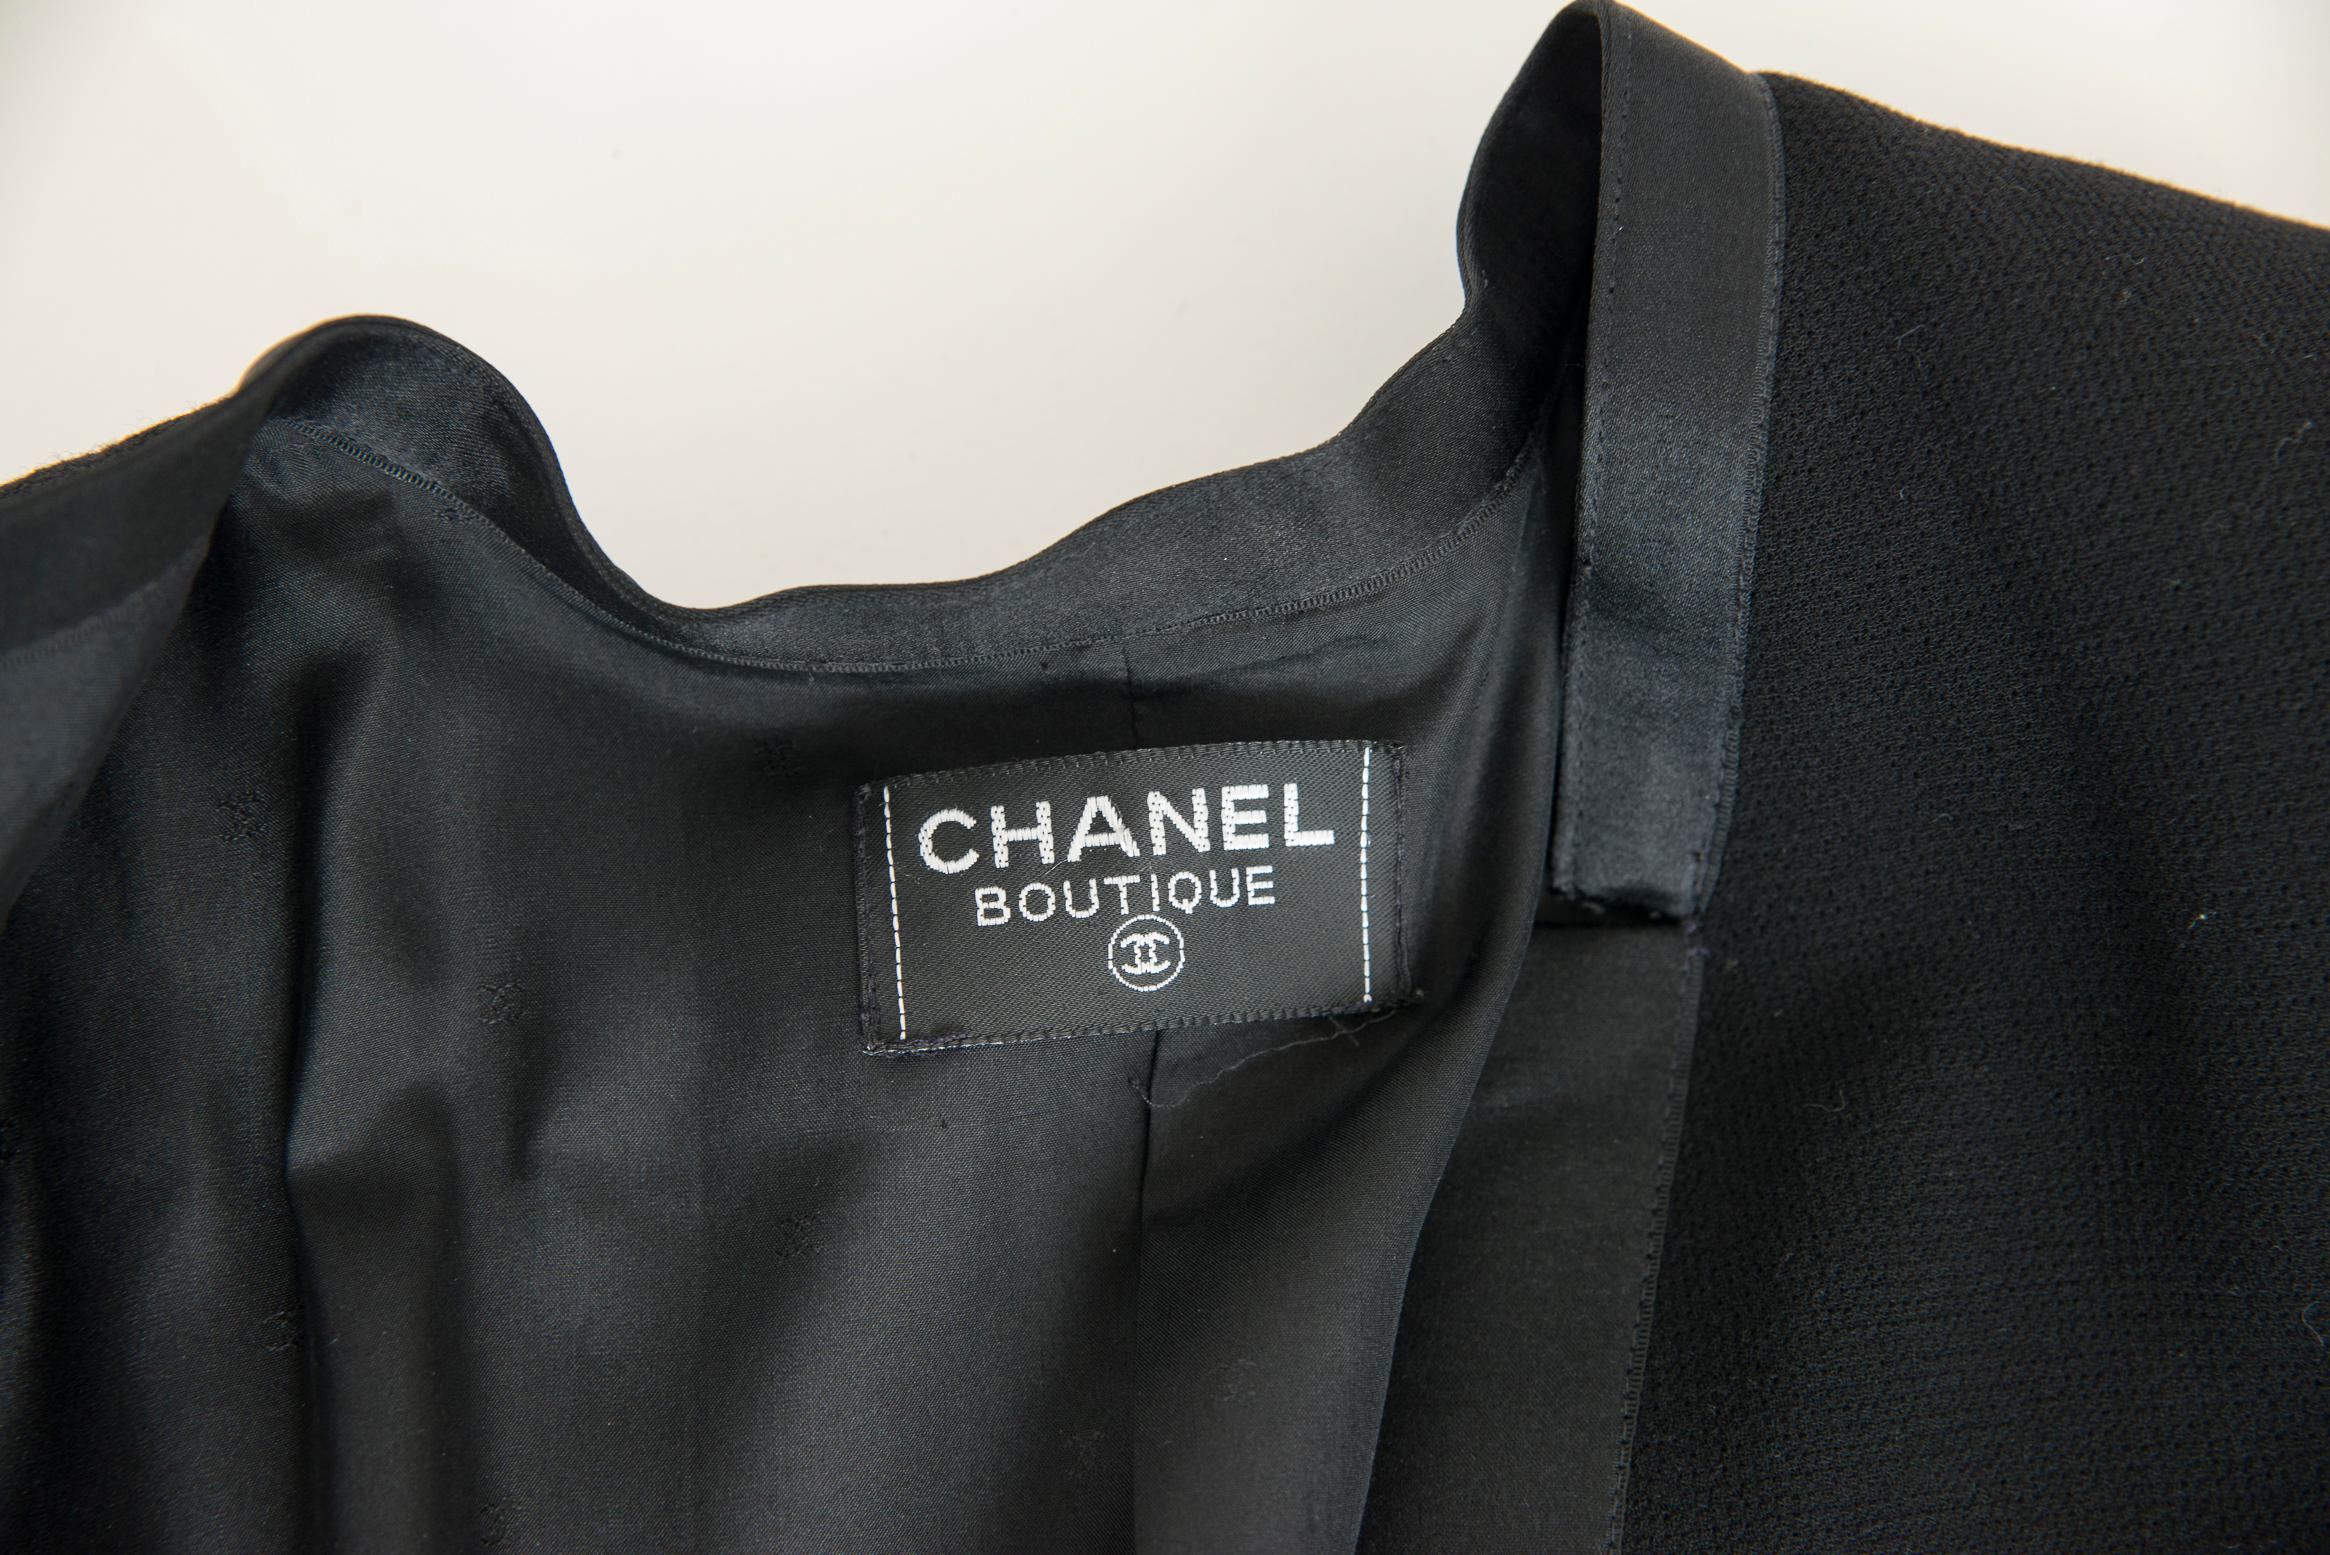 Chanel By Karl Lagerfeld Button-Embellished Little Black Dress, FW 1990-1991 For Sale 5